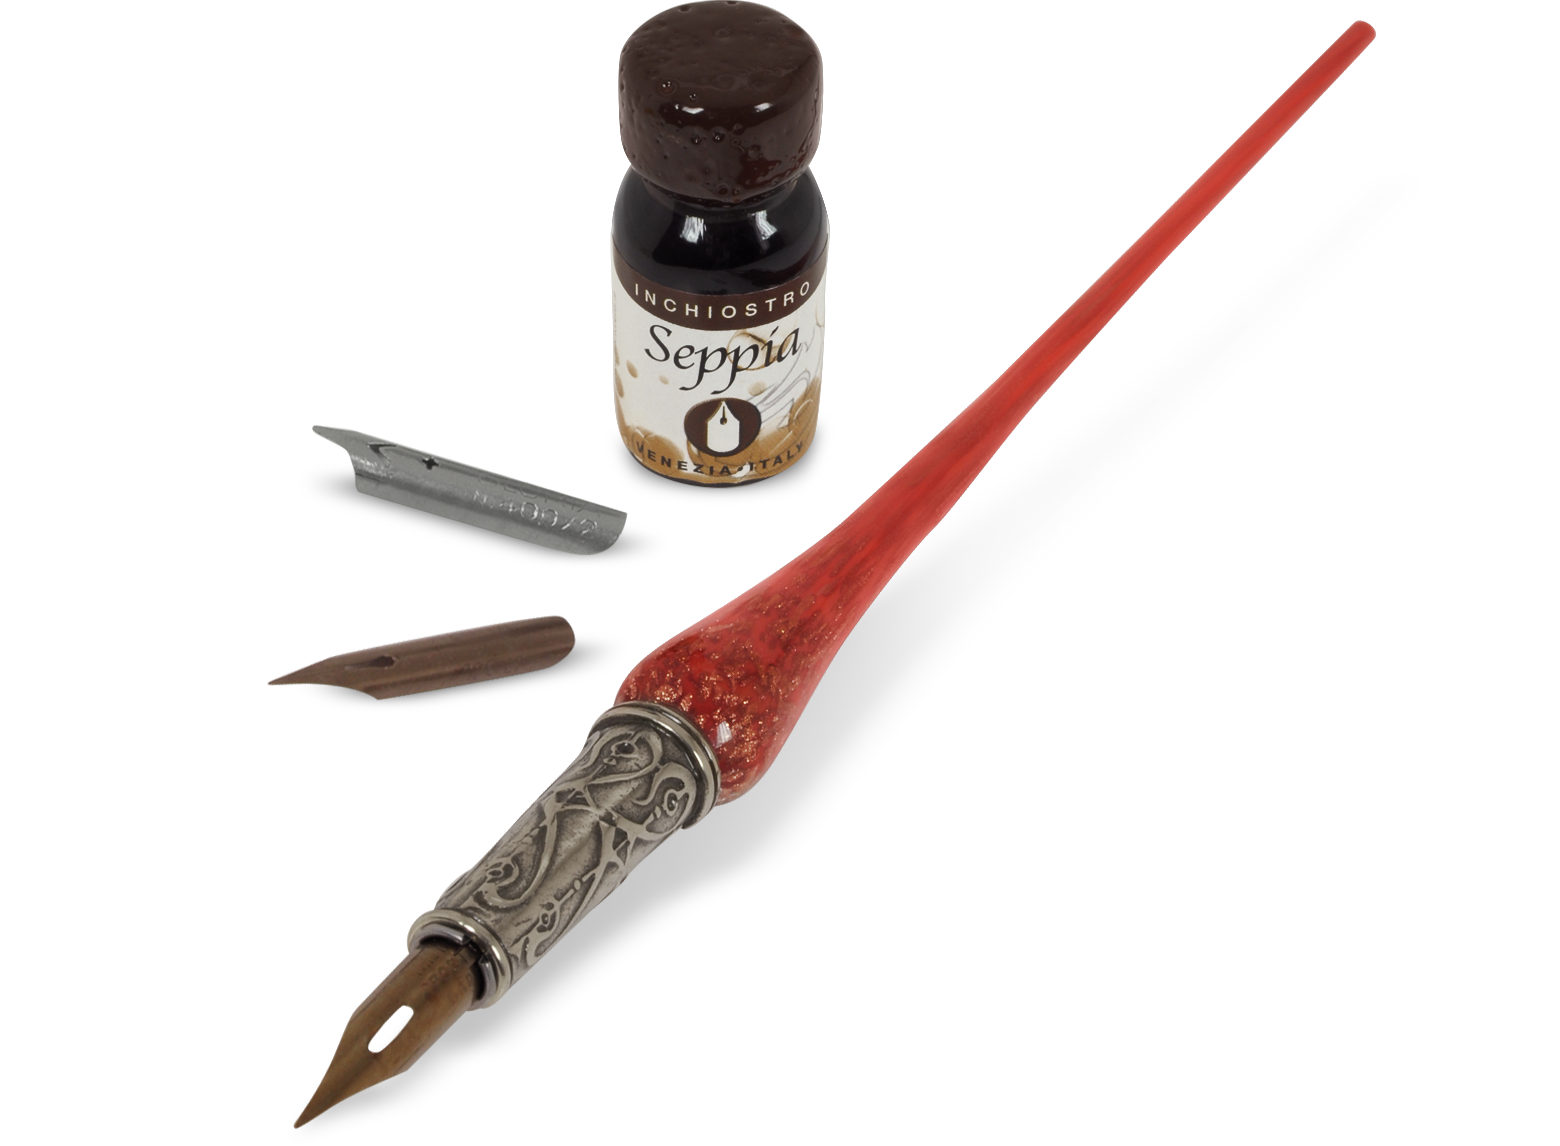 Pointed Pen Calligraphy Kit